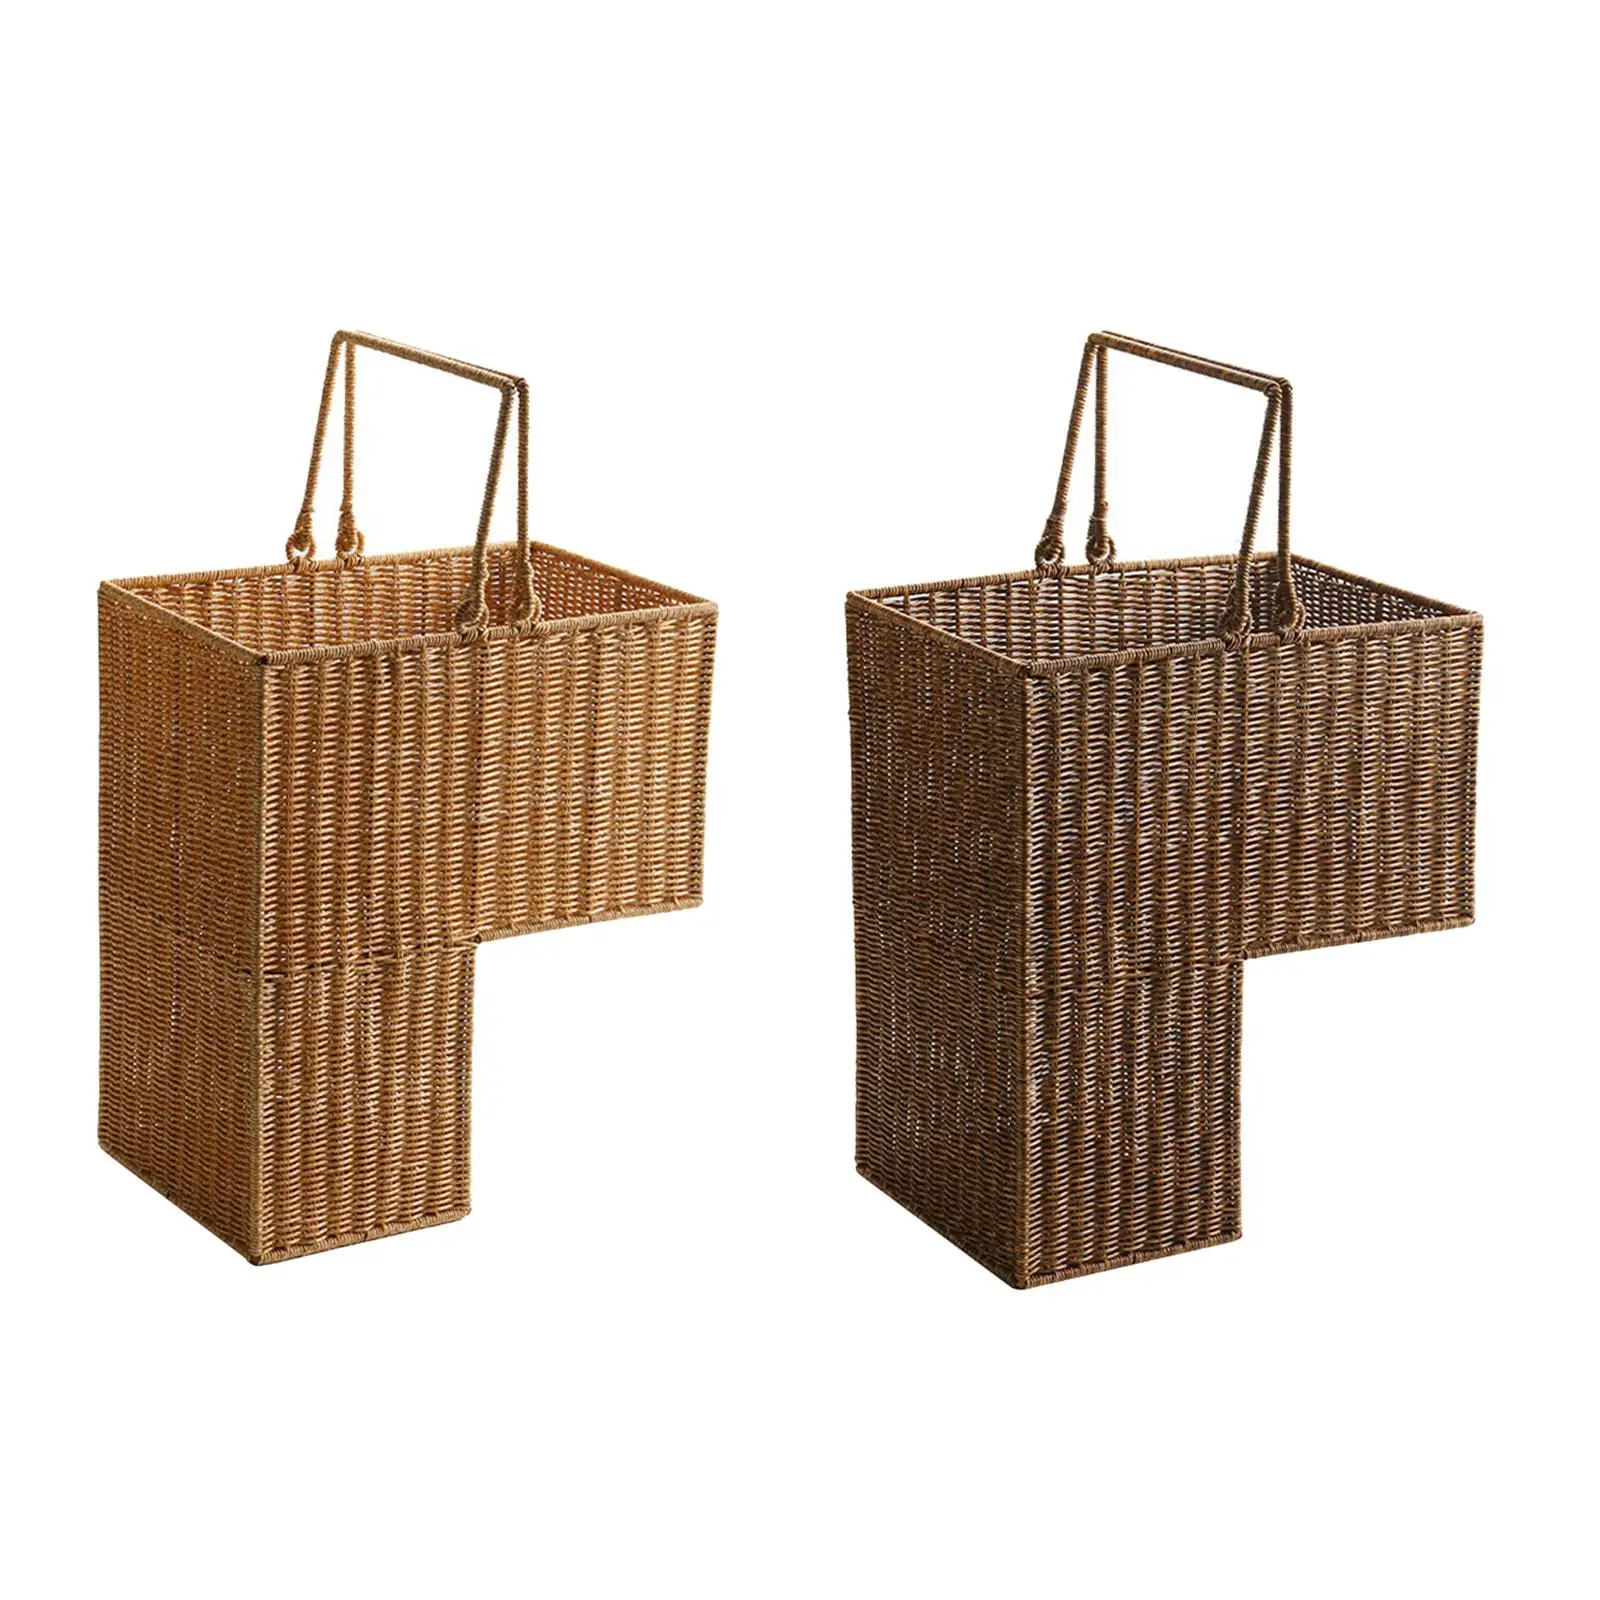 Storage Stair Basket with Handle Portable Stackable Handwoven Space Saving for Books Toiletries Home Decorative Patio Bathroom